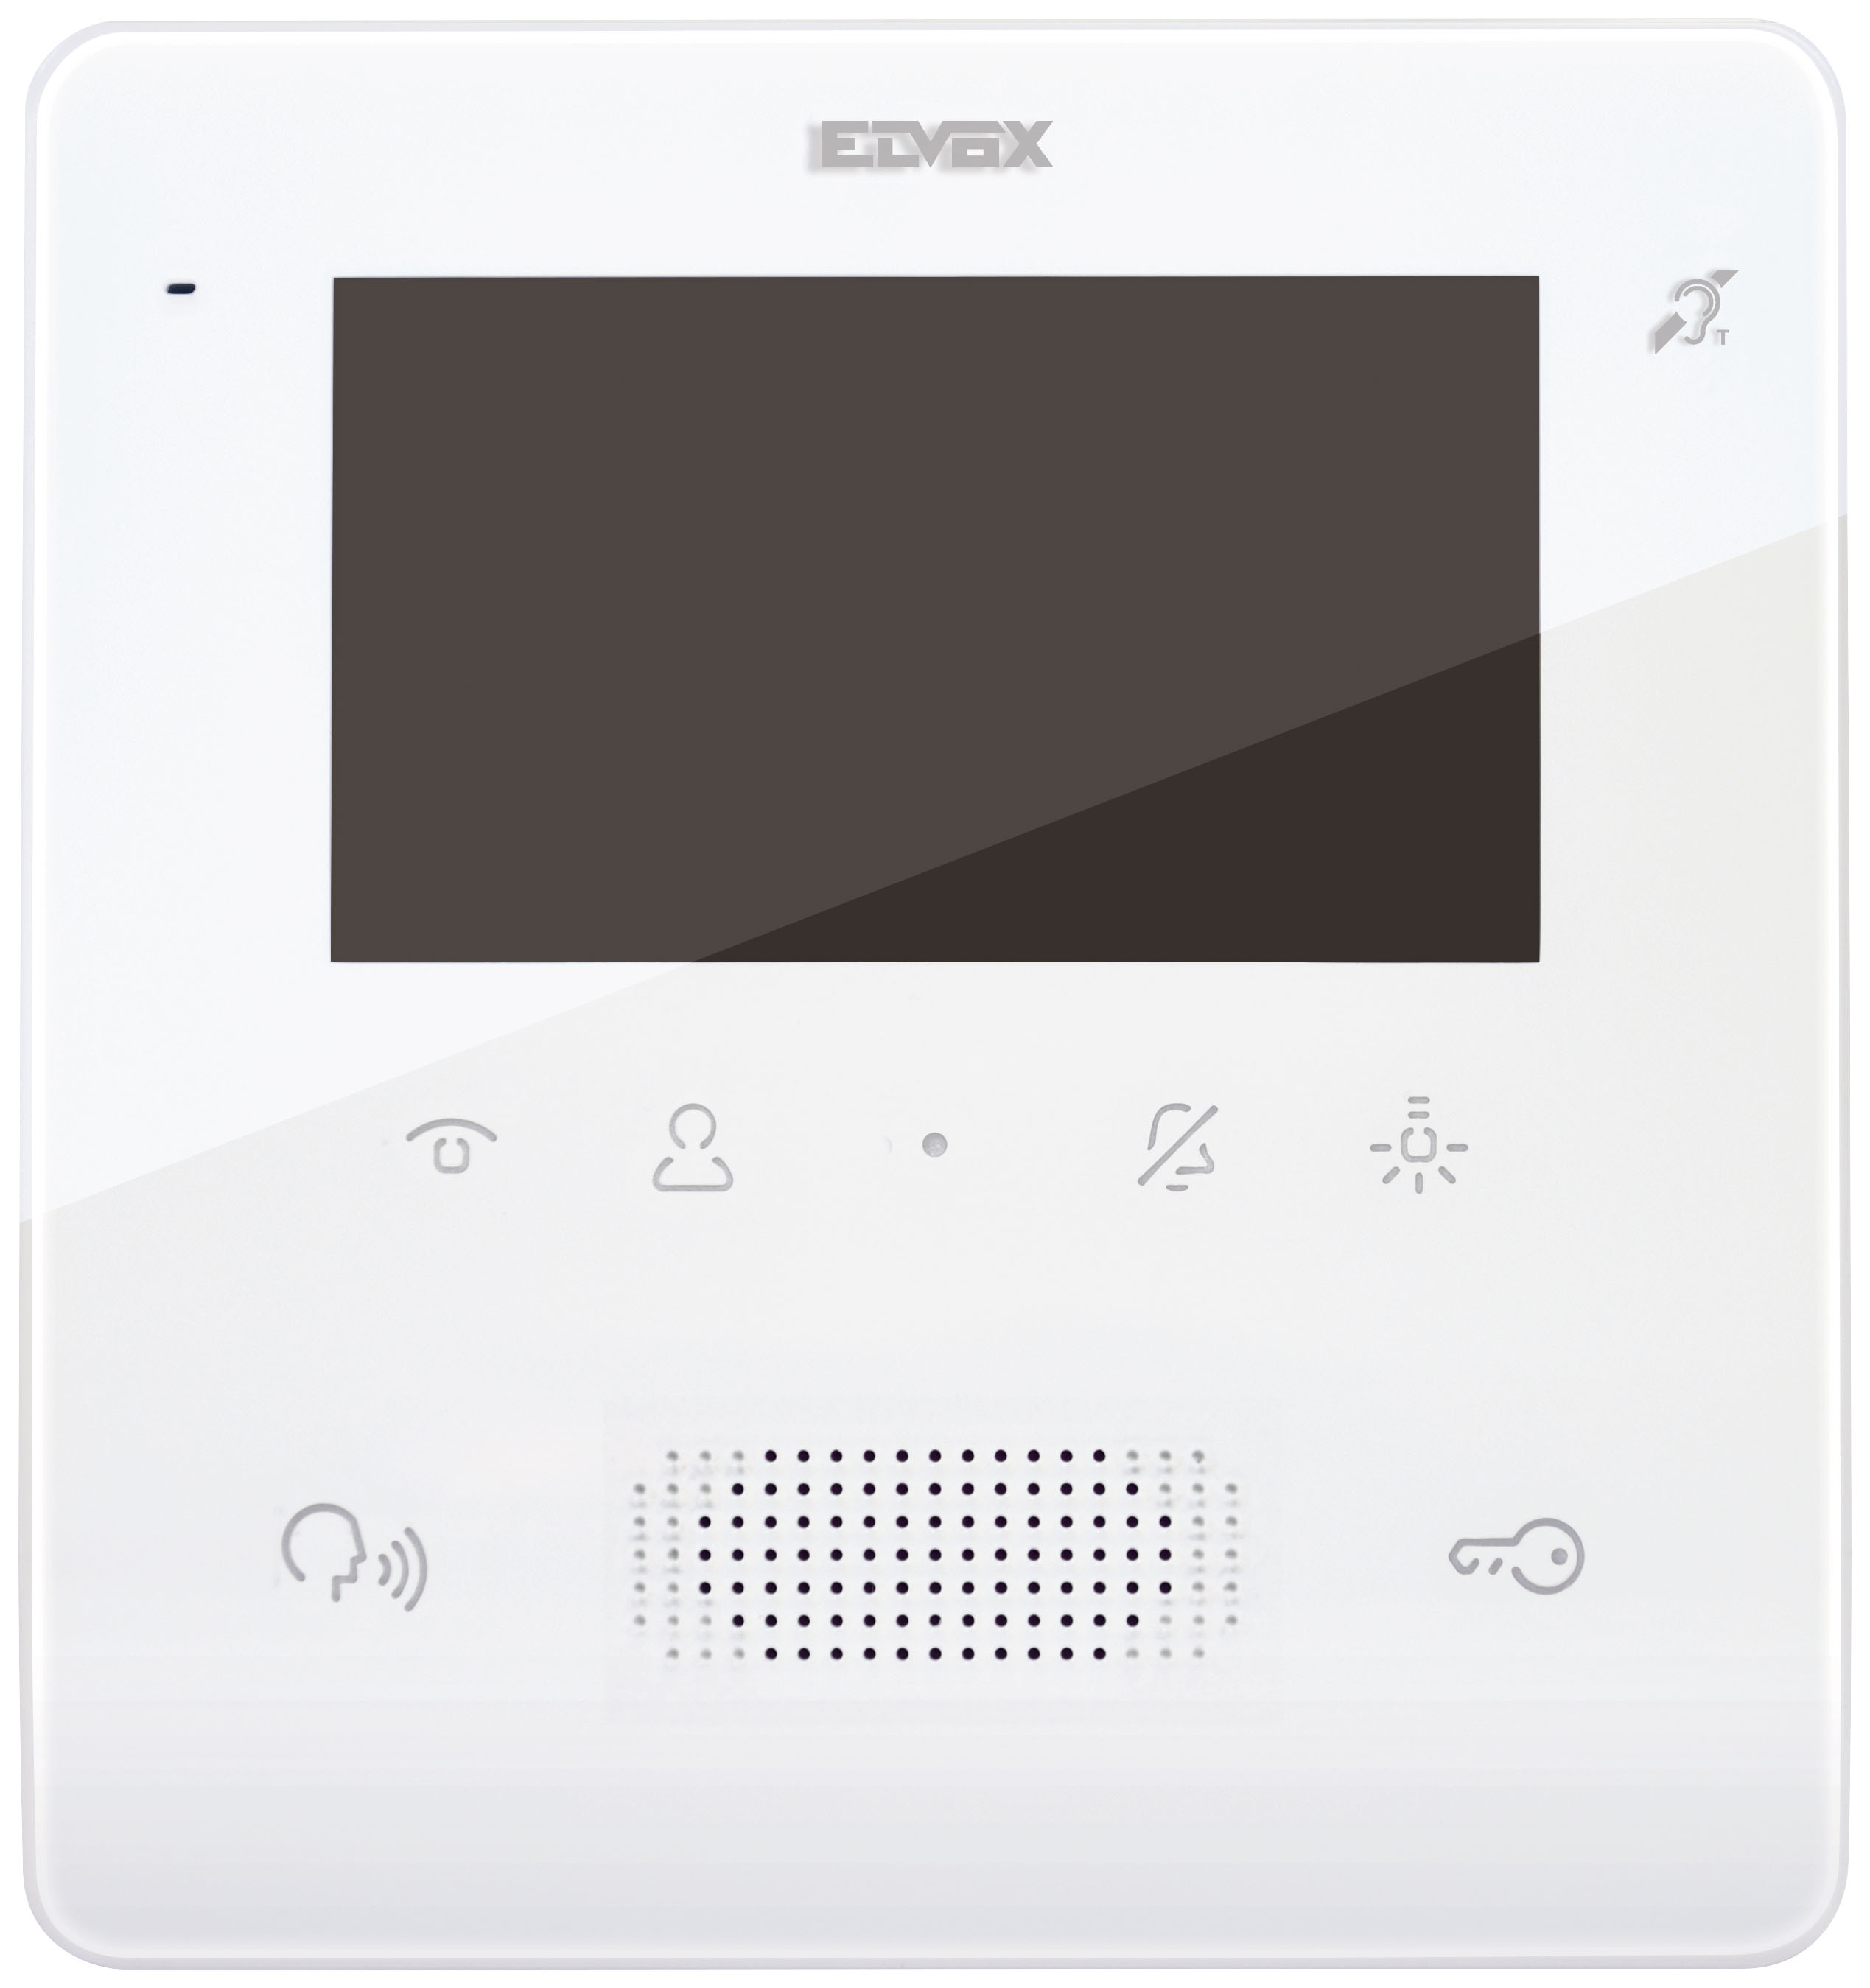 ELVOX TAB FREE 2-WIRE INTERCOM MONITOR WHITE APARTMENT 4.3 INCH DISPLAY CAPACITIVE KEYPAD PLASTIC POWER BY BUS CONTROLLER